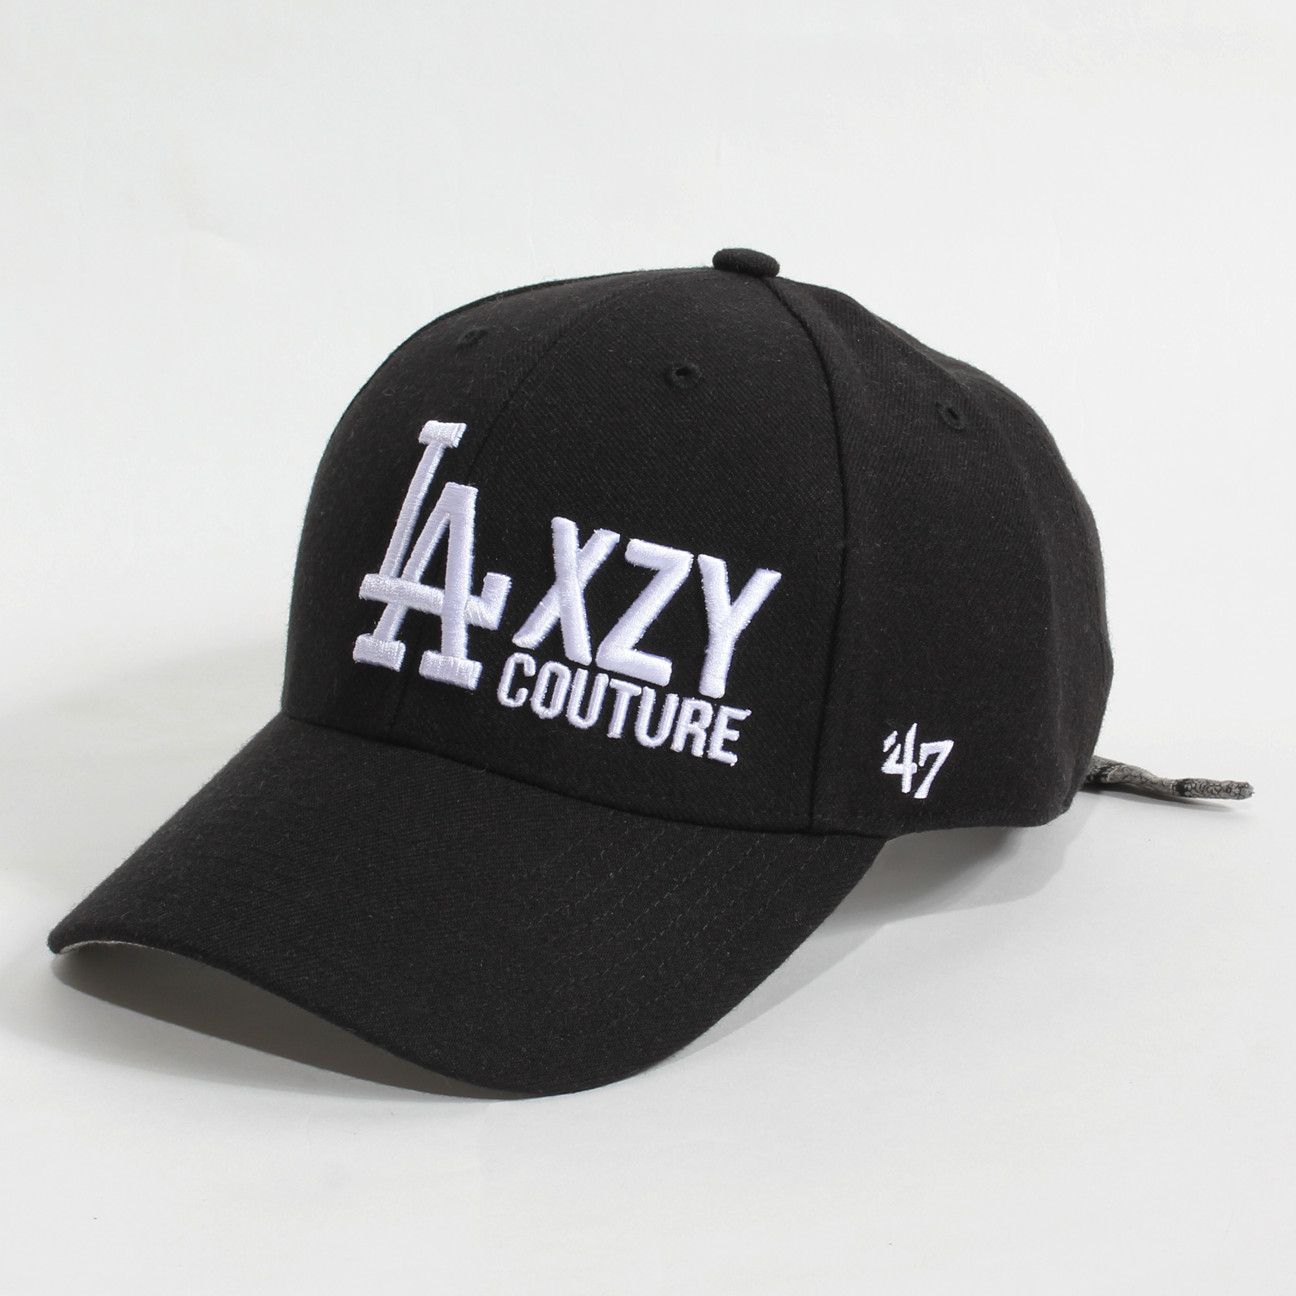 3D EMBROIDERY LOGO CAP – LAXZY COUTURE